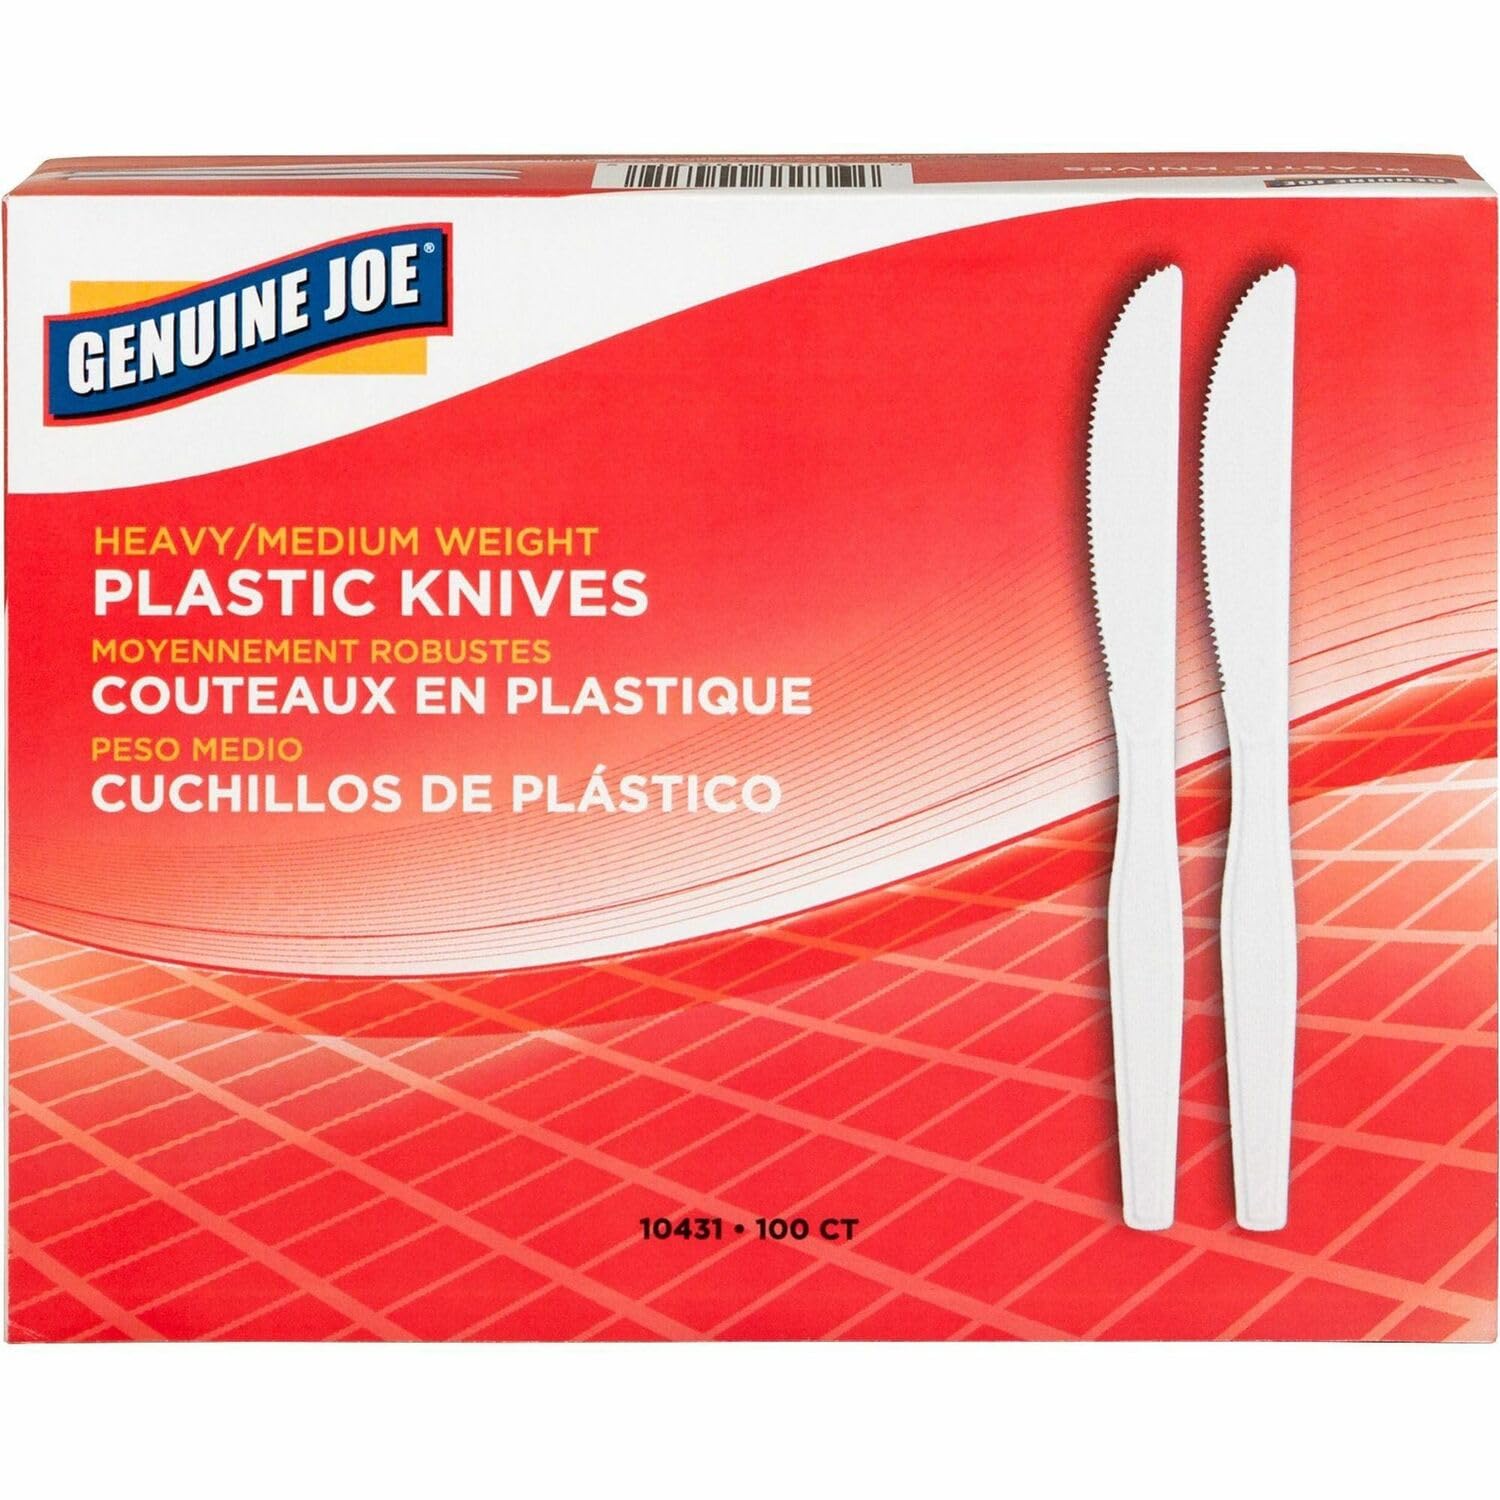 100-Count Genuine Joe Heavy/Medium Weight Plastic Knives (10431) $2.48 ($0.02 each) + Free Shipping w/ Prime or on $35+